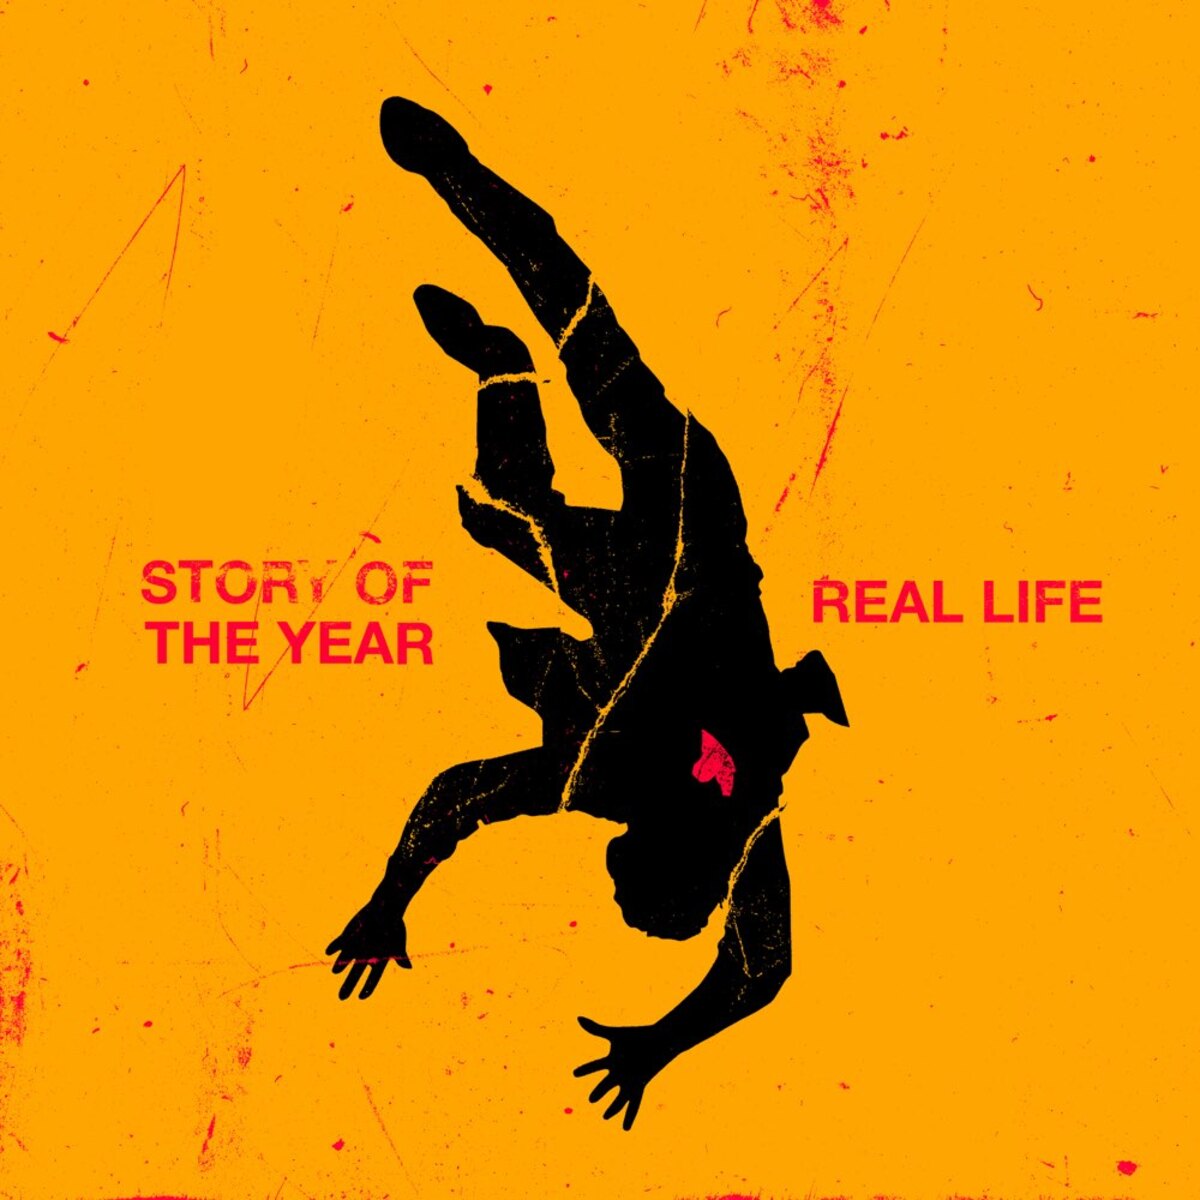 STORY OF THE YEAR、新曲「Real Life」リリース＆MV公開！ | 激ロック ニュース